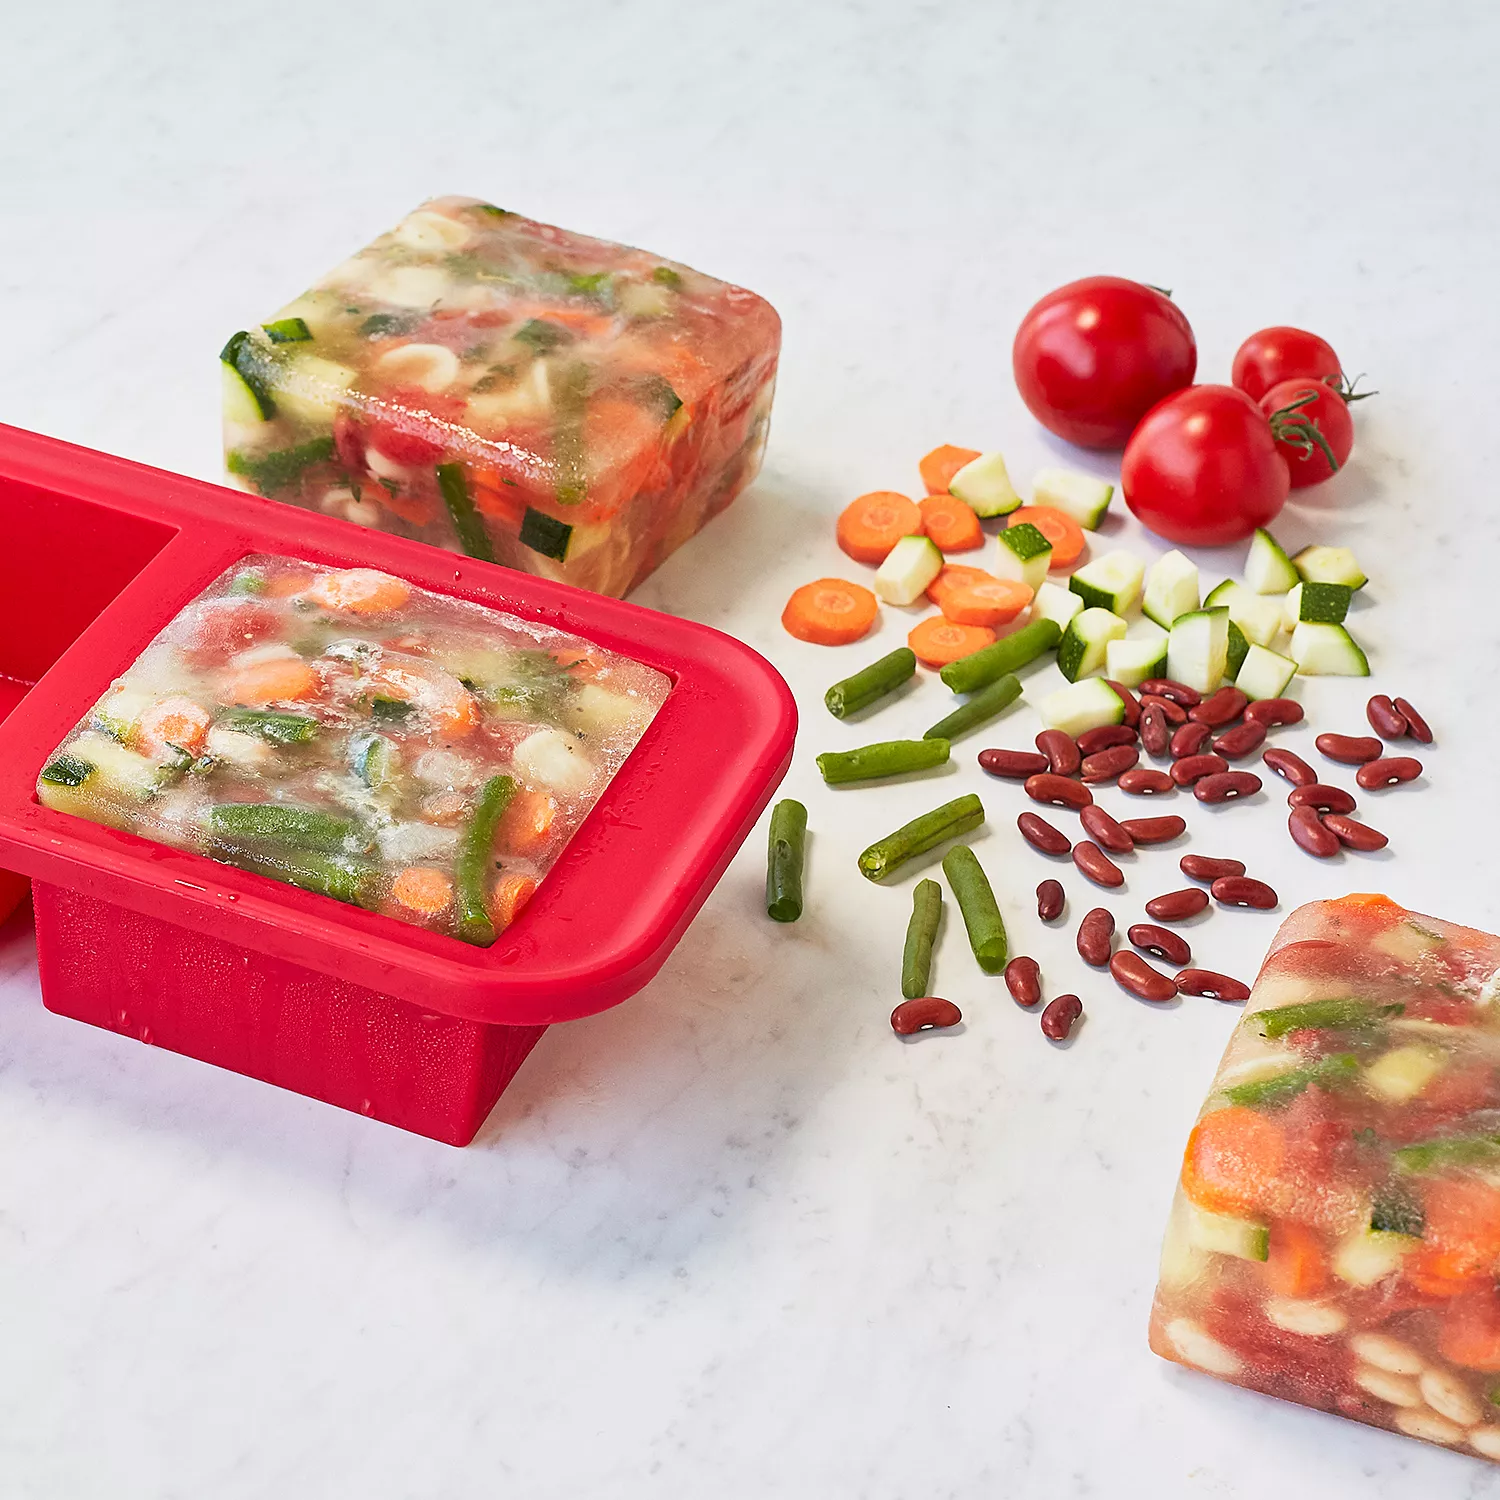 Souper Cubes 1-Cup Silicone Freezing Tray - Freeze and Store Food in 1-Cup  Portions, Aqua, 2-Pack, with lids dishwasher and oven safe freezer  containers 